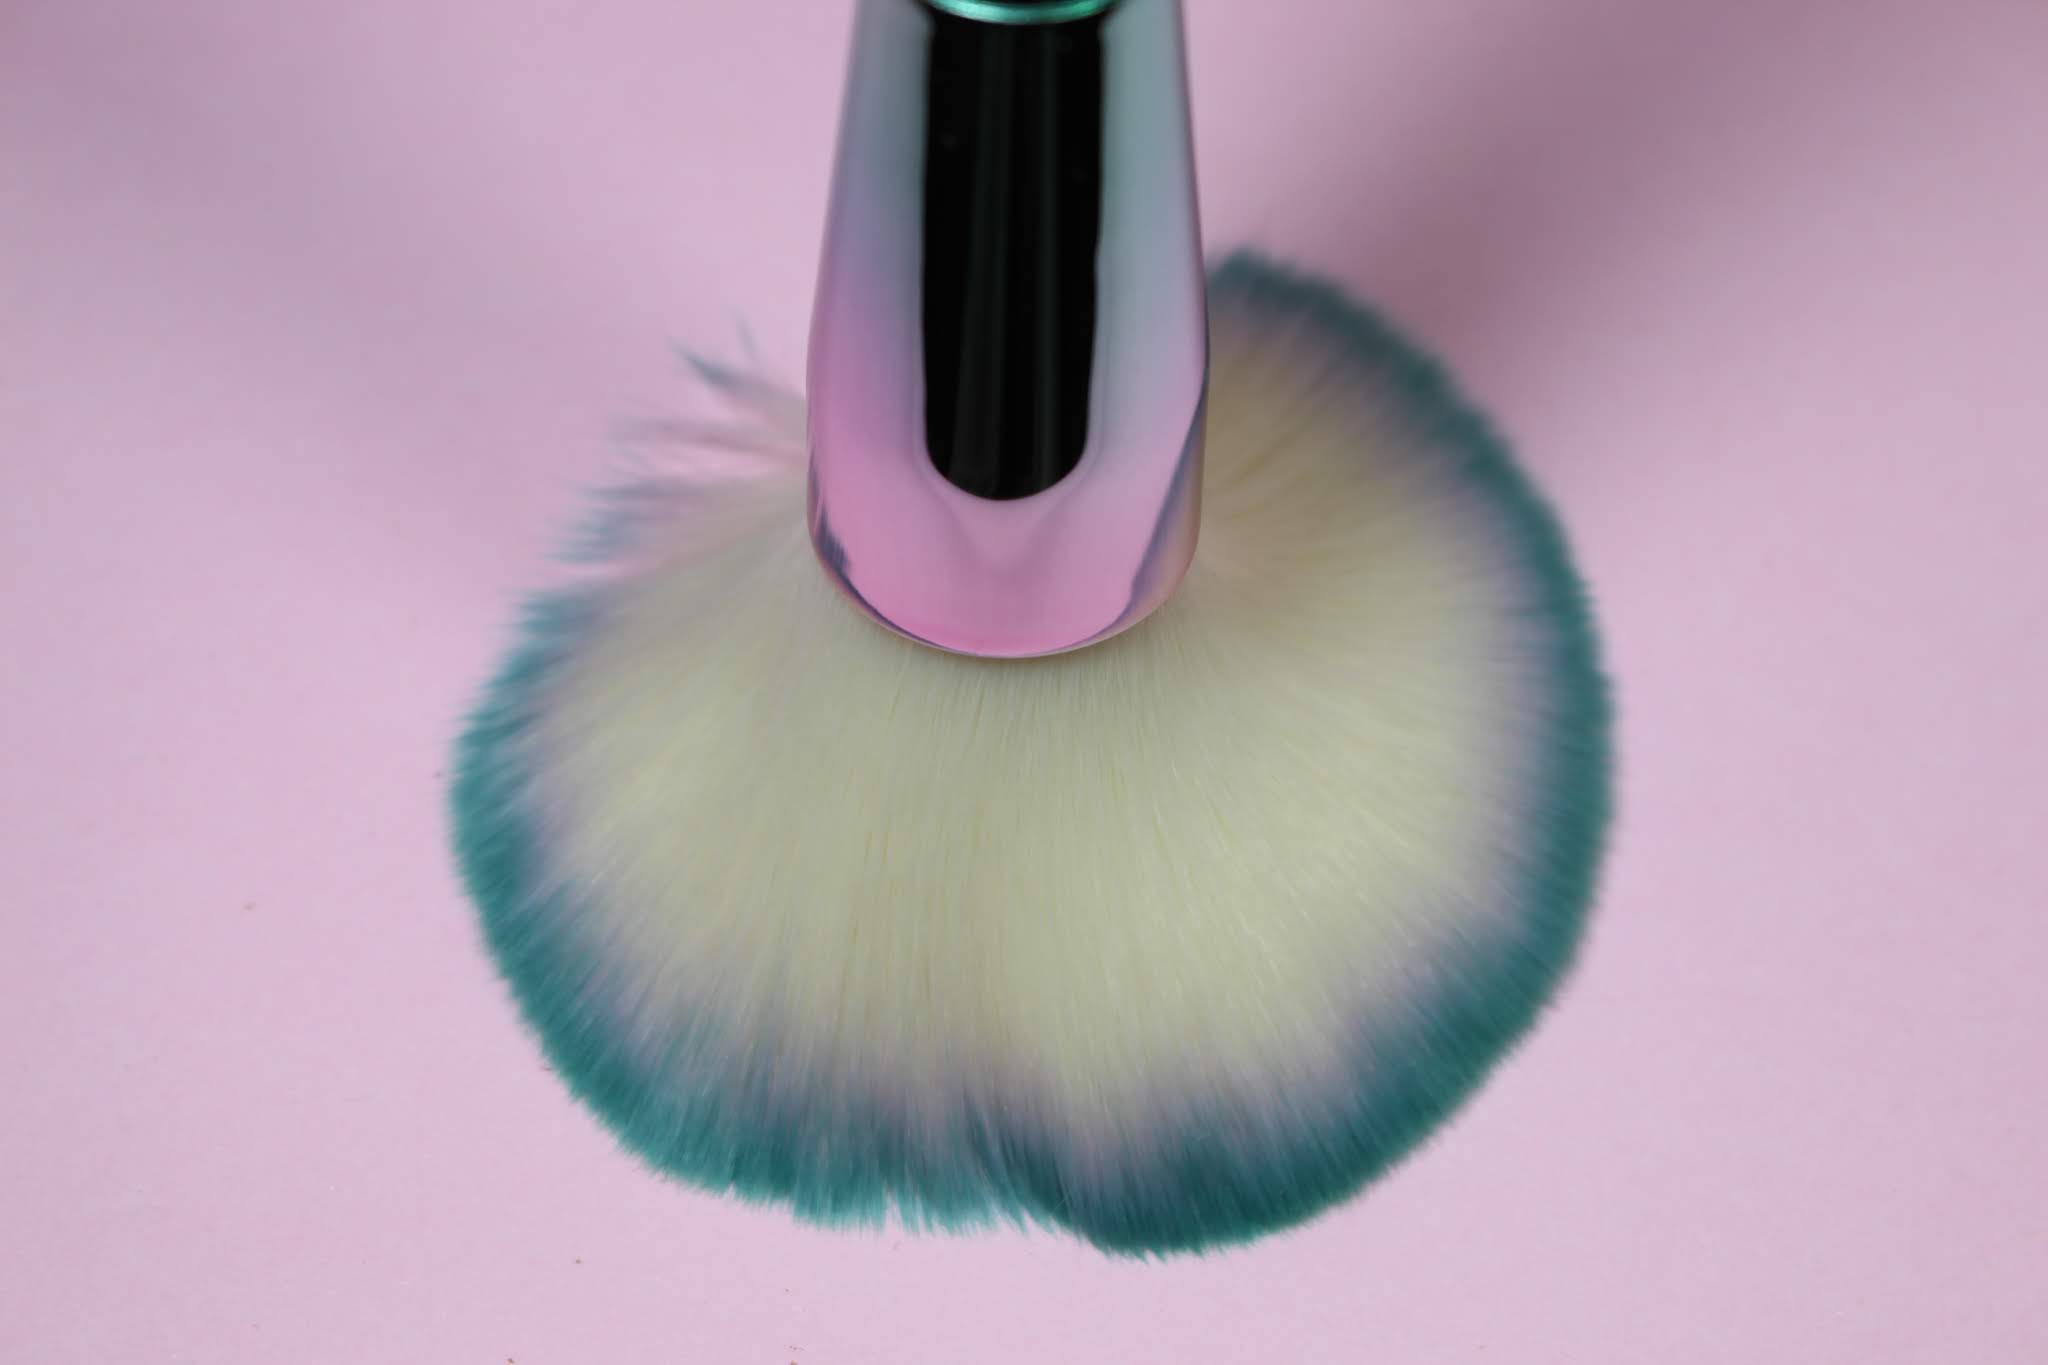 close-up of makeup brushe's head with synthetic bristles